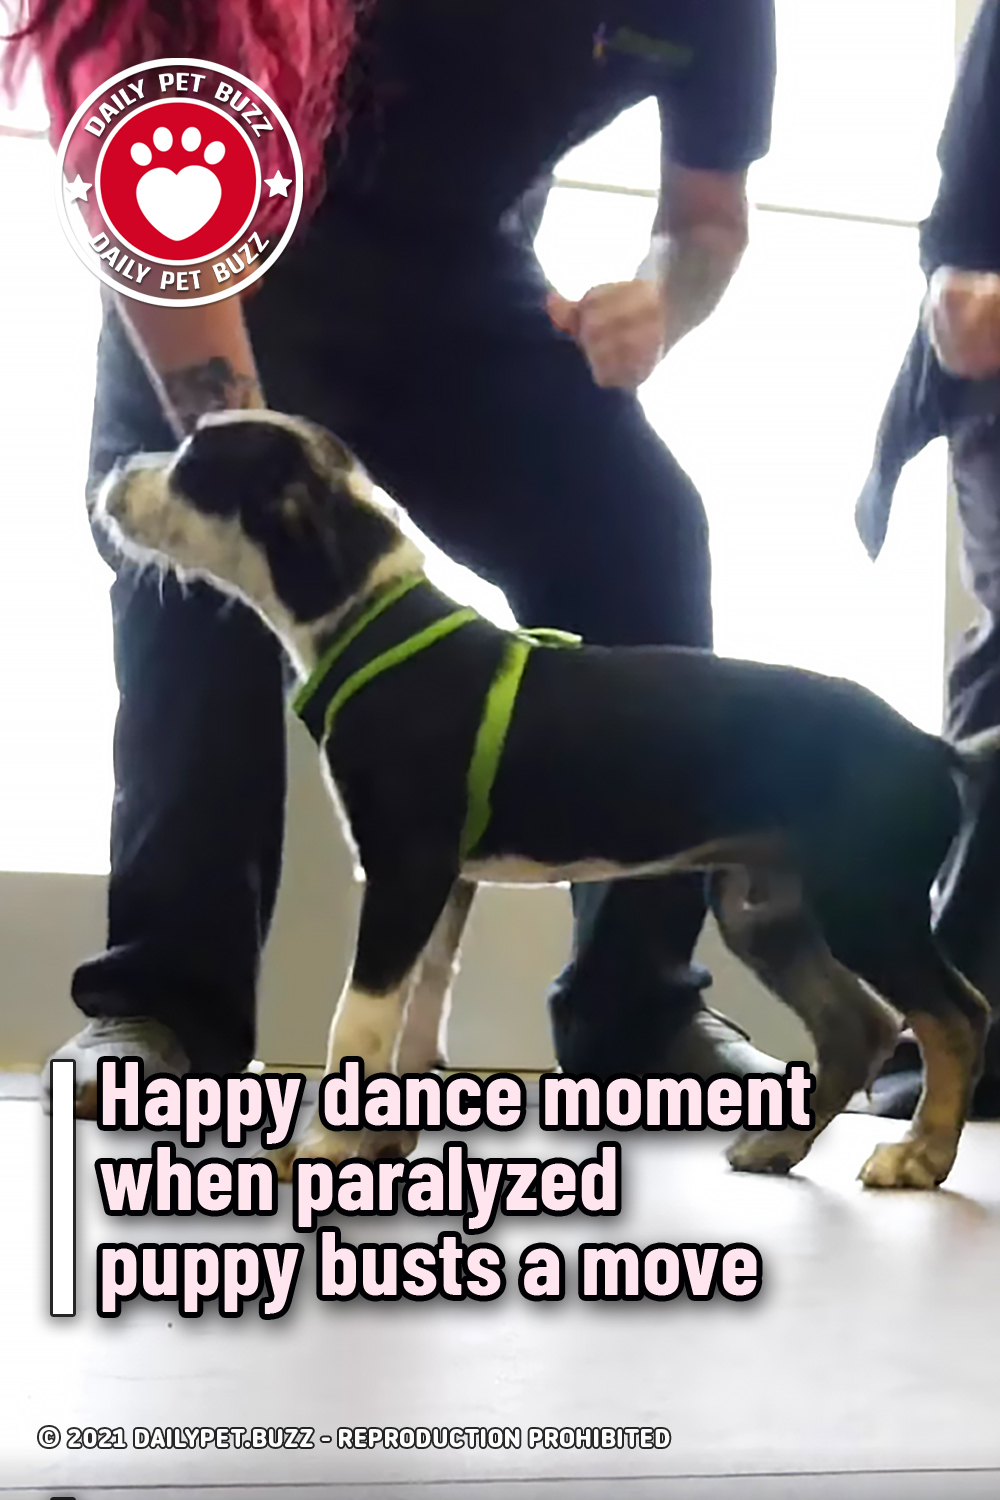 Happy dance moment when paralyzed puppy busts a move